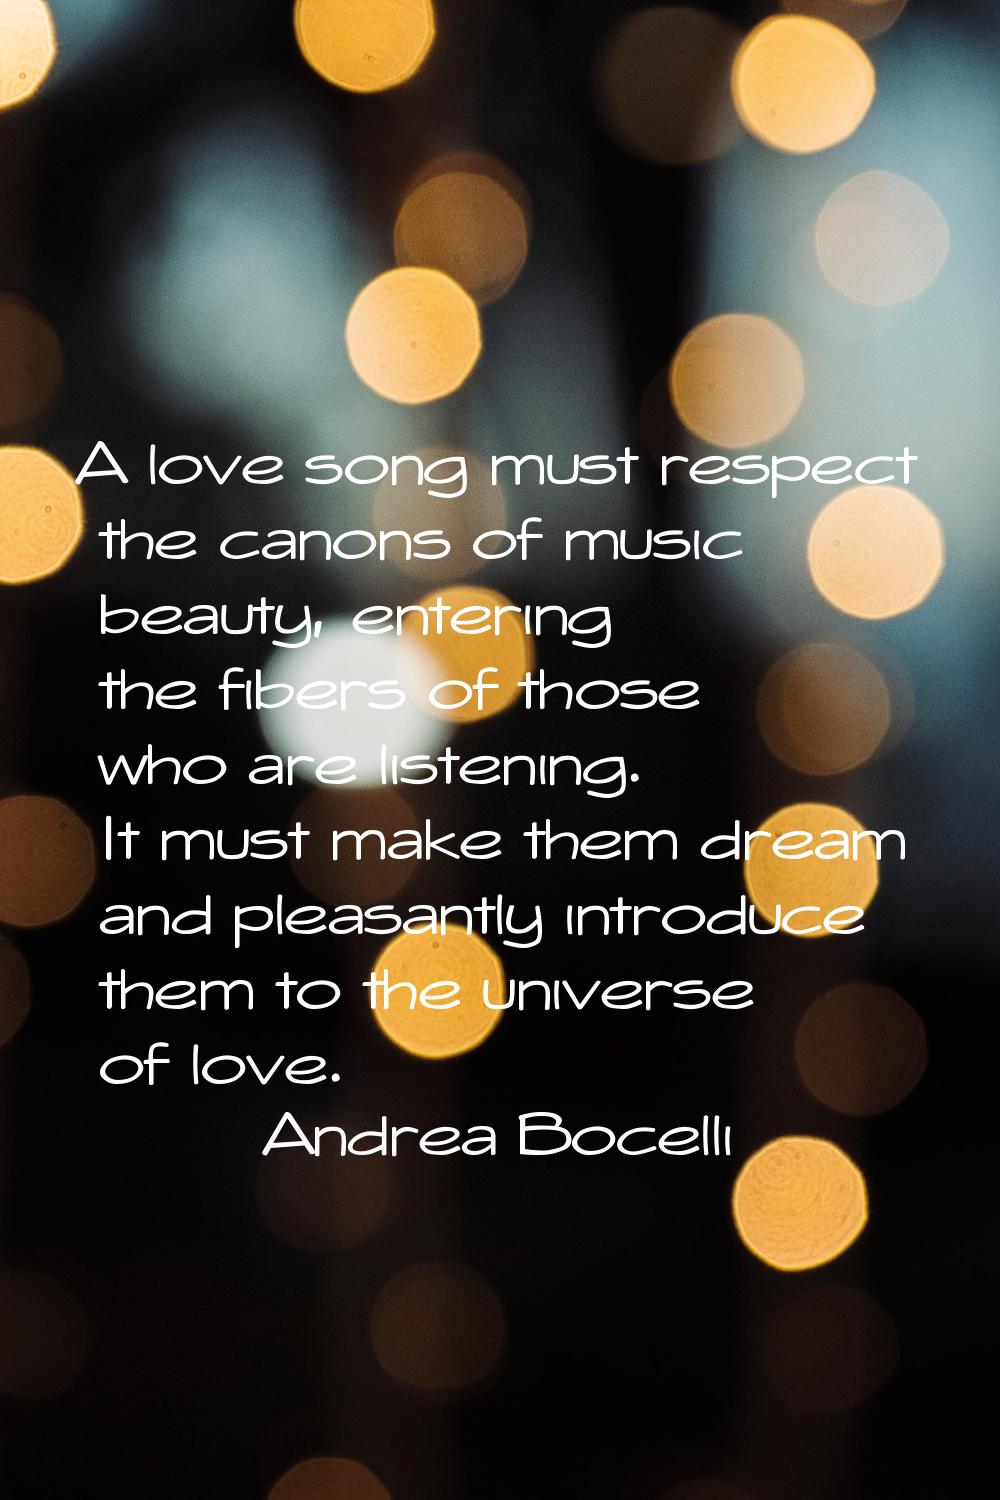 A love song must respect the canons of music beauty, entering the fibers of those who are listening